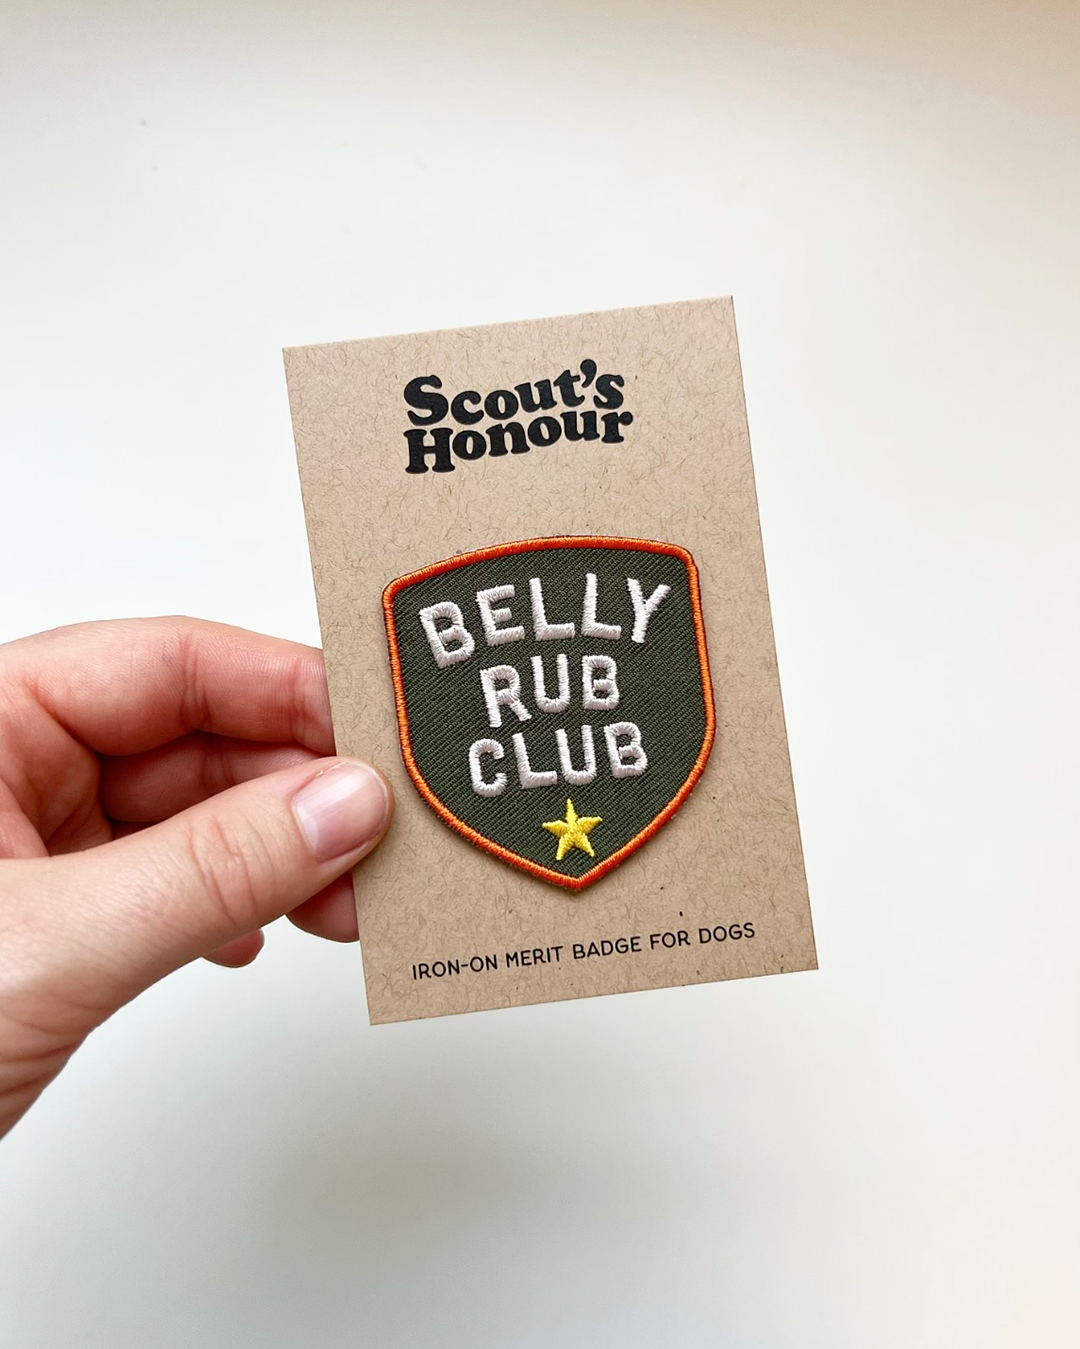 Scout's Honour - Belly Rub Club iron-on patch for dogs